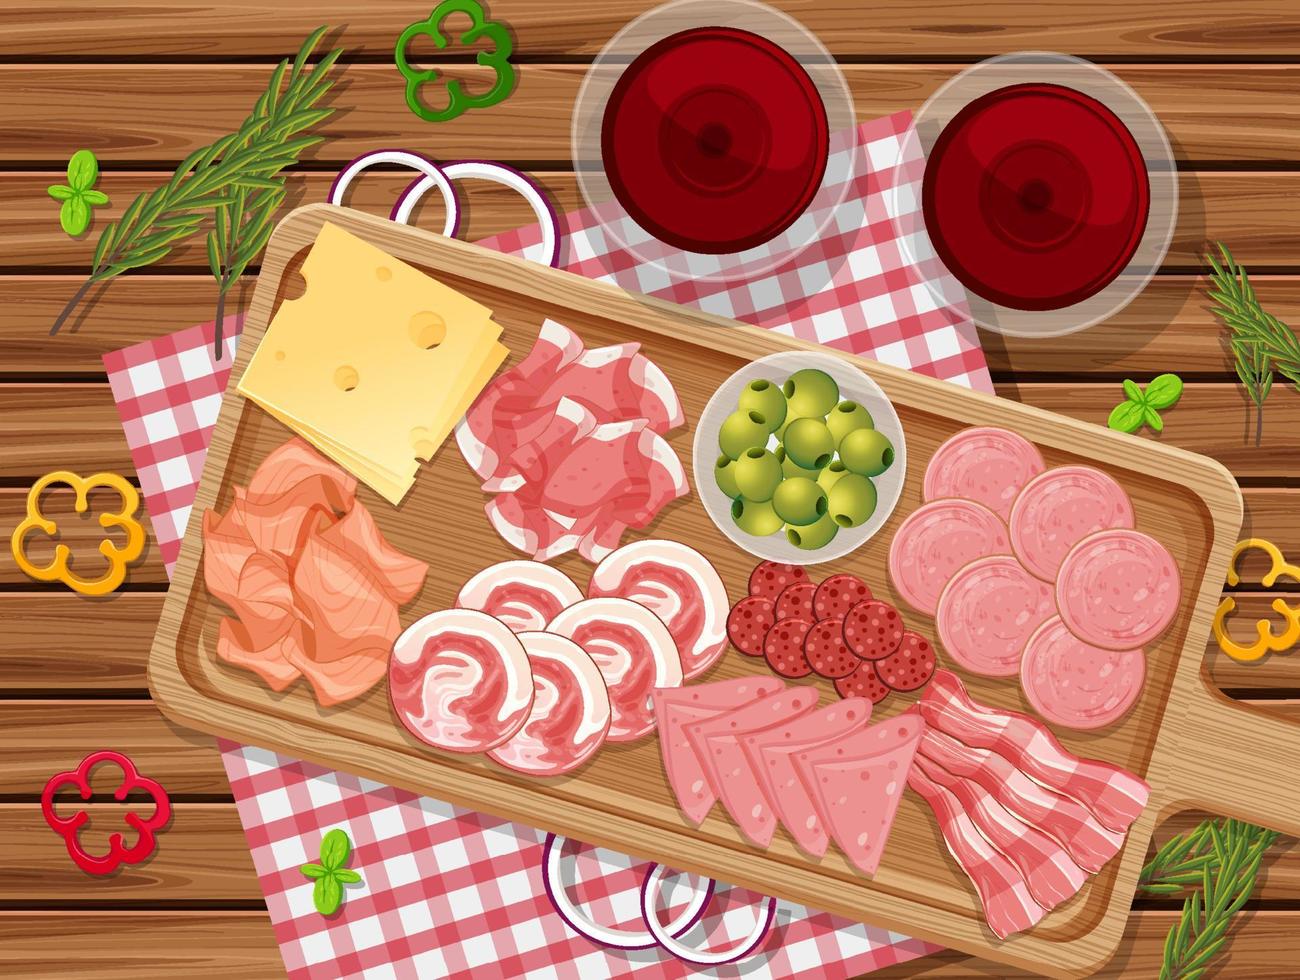 Platter of cold meats and smoked meat on the table background vector